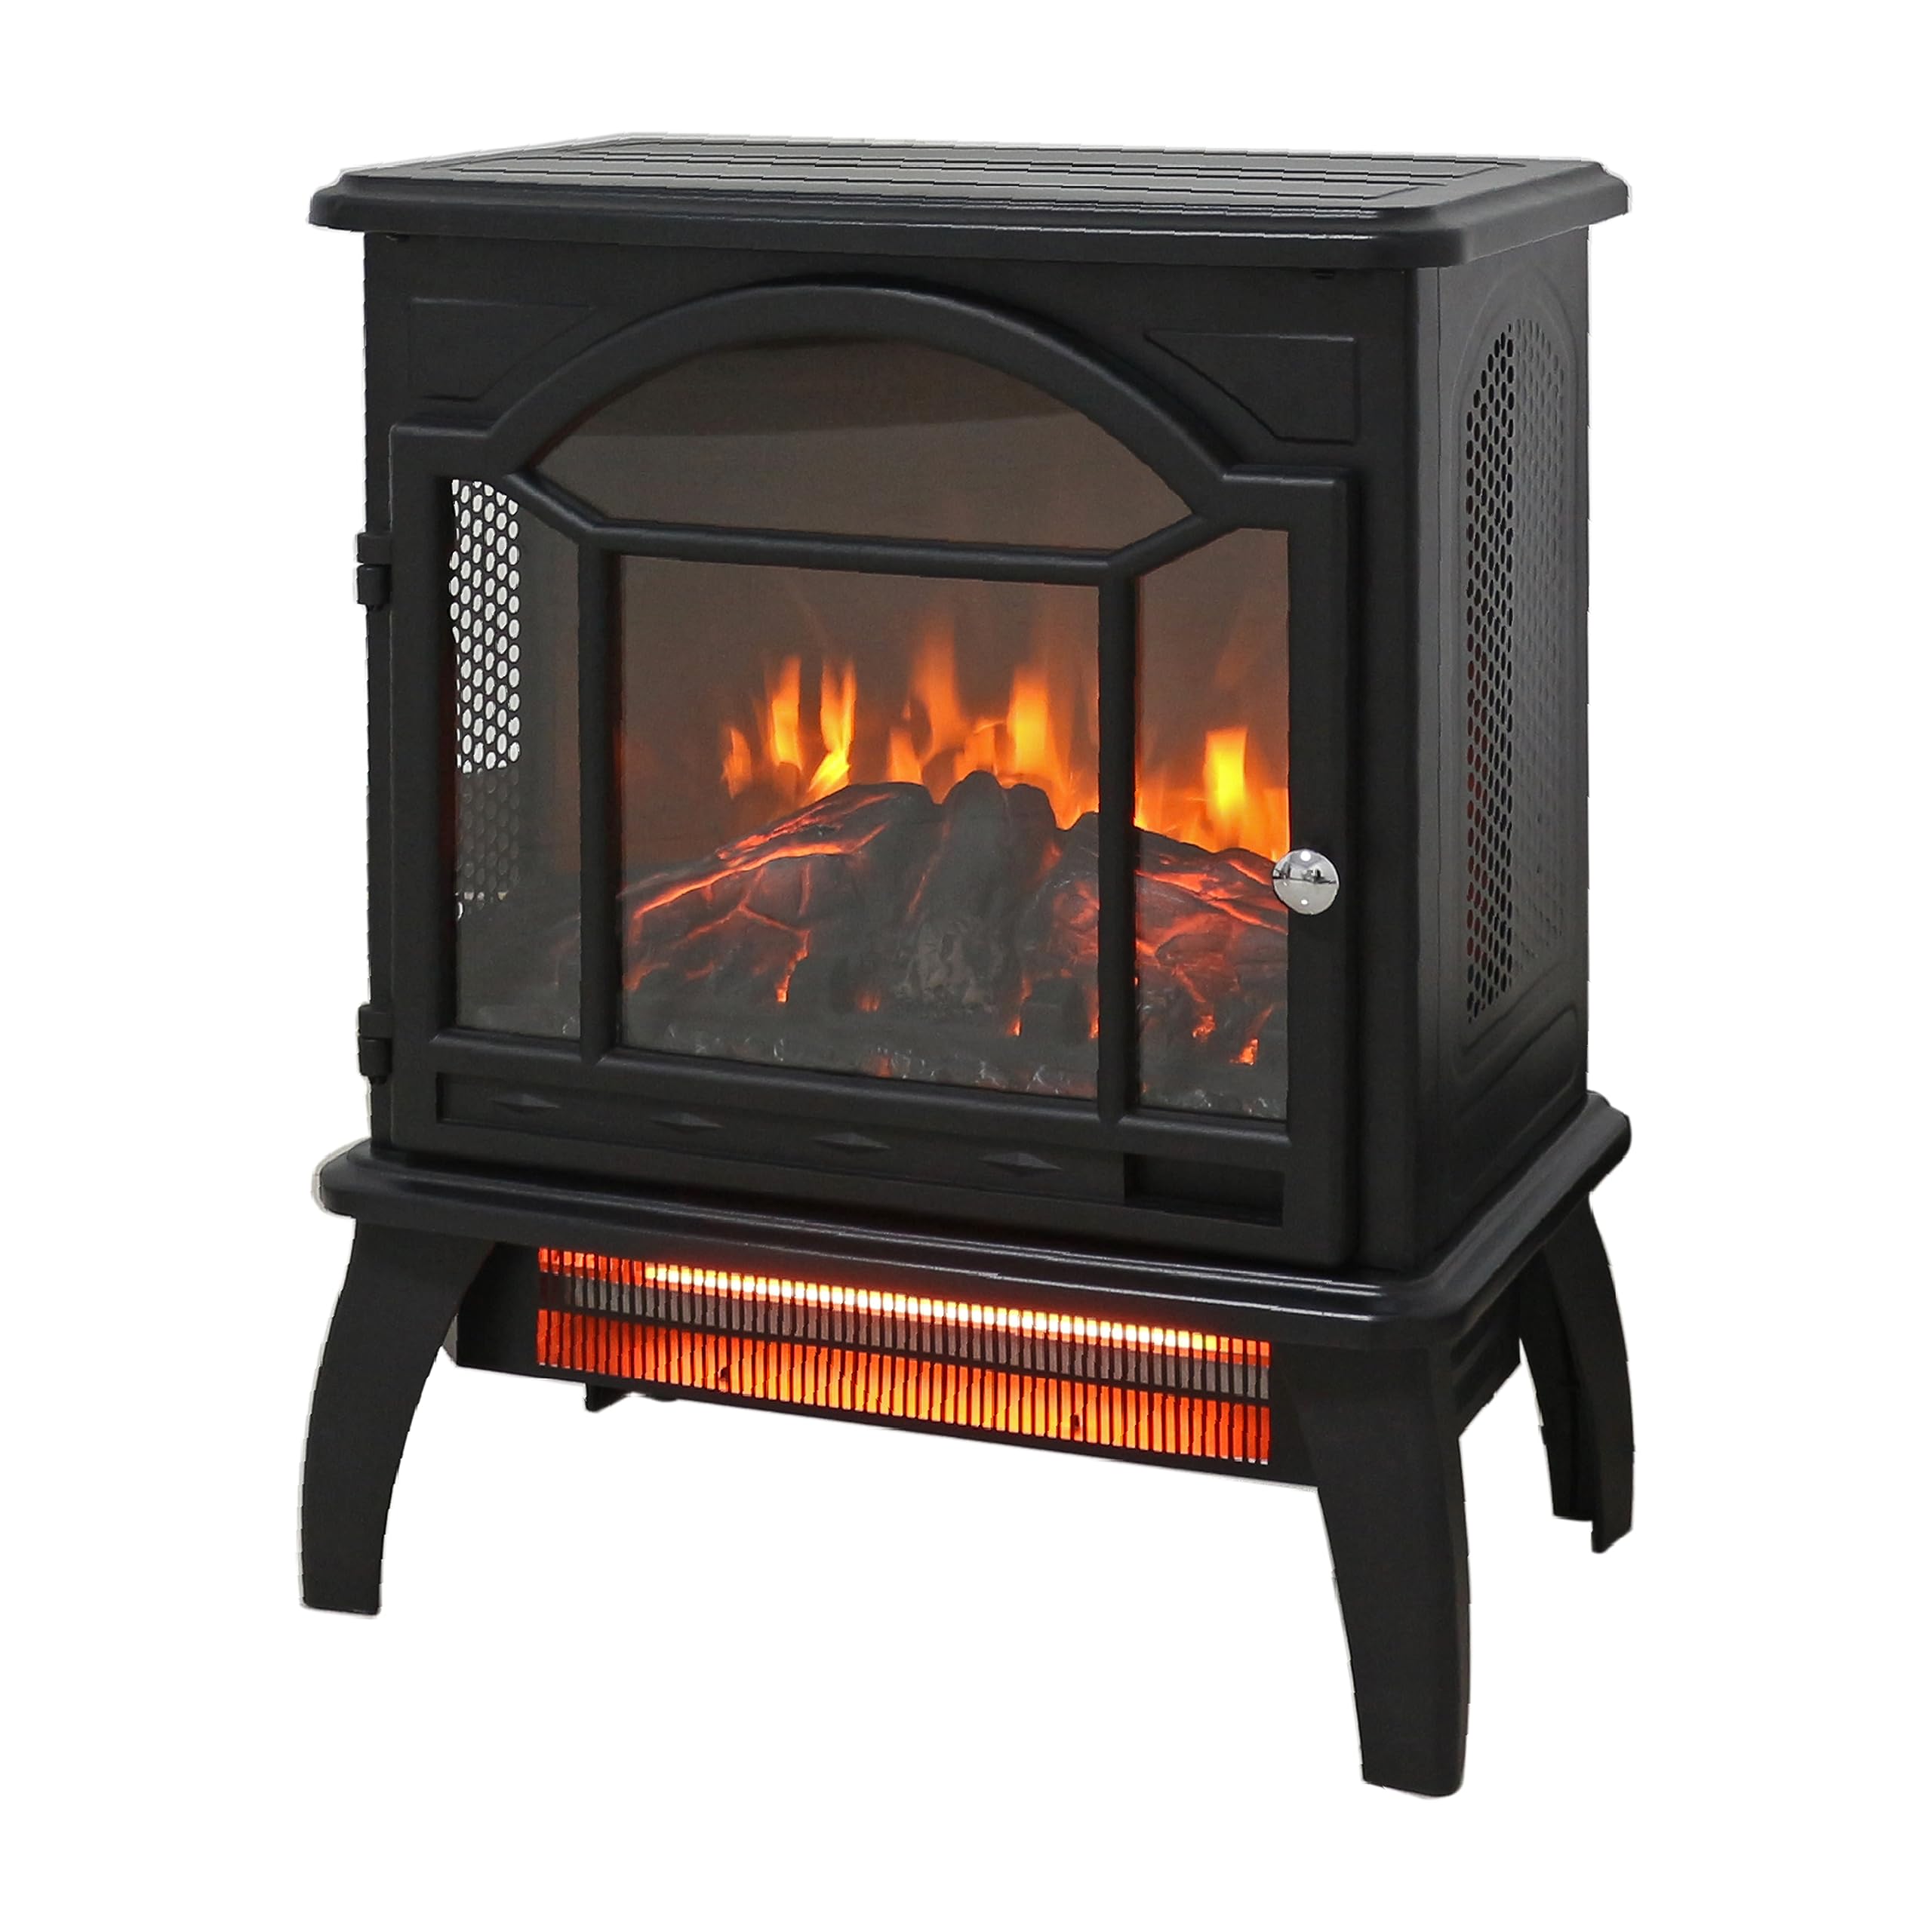 KOFOHON Freestanding Electric Fireplace Heater,Portable Infrared Fireplace Stove with 4 Types of 3D Realistic Flame Effects,Adjustable Temperature Compact Indoor Space Heater,Timer&Remote,18".